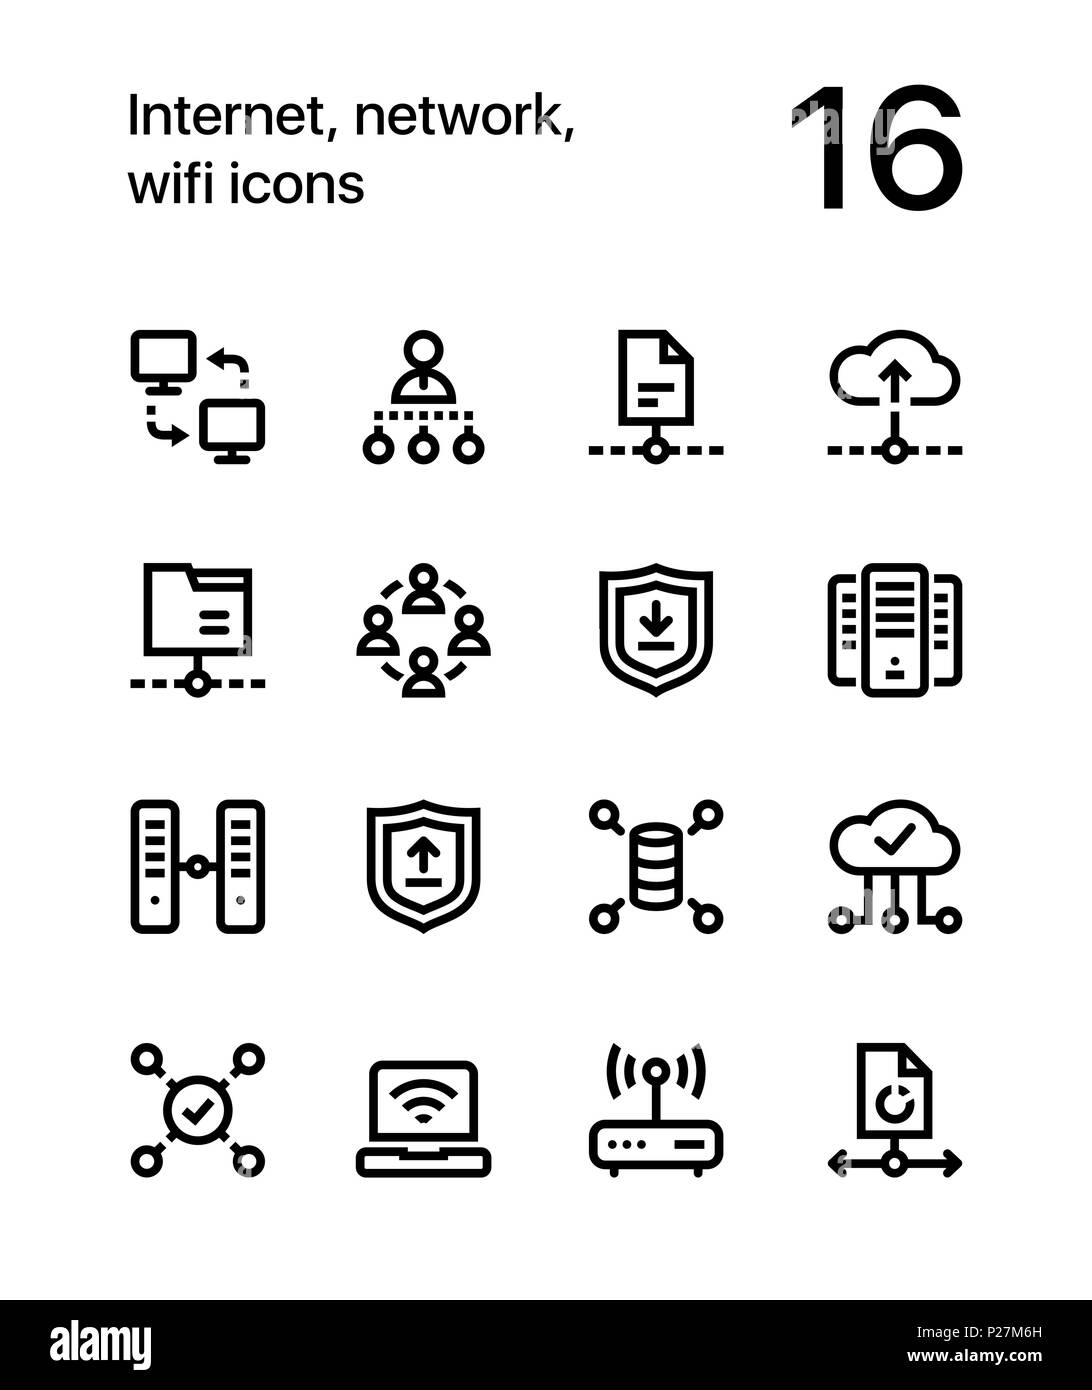 Internet, network, wifi icons for web and mobile design pack 3 Stock Vector